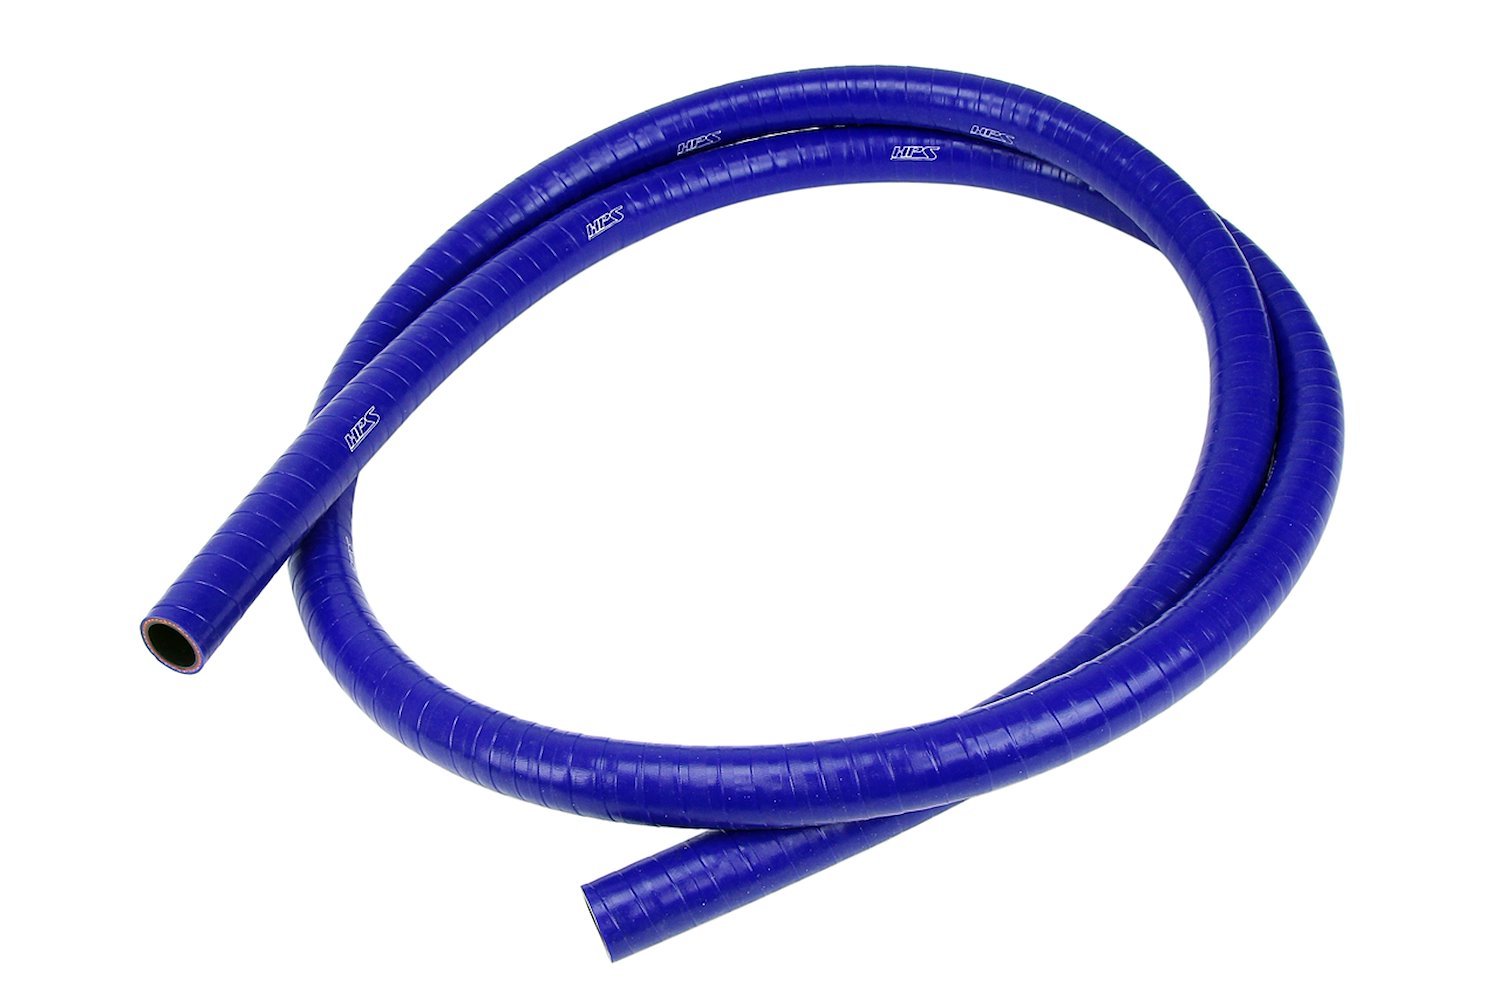 FKM-2F-062-BLUE FKM Silicone Hose, Silicone Oil Resistant Hose, High-Temp 1-Ply Reinforced, 5/8 in. ID, 2 ft. Long, Blue